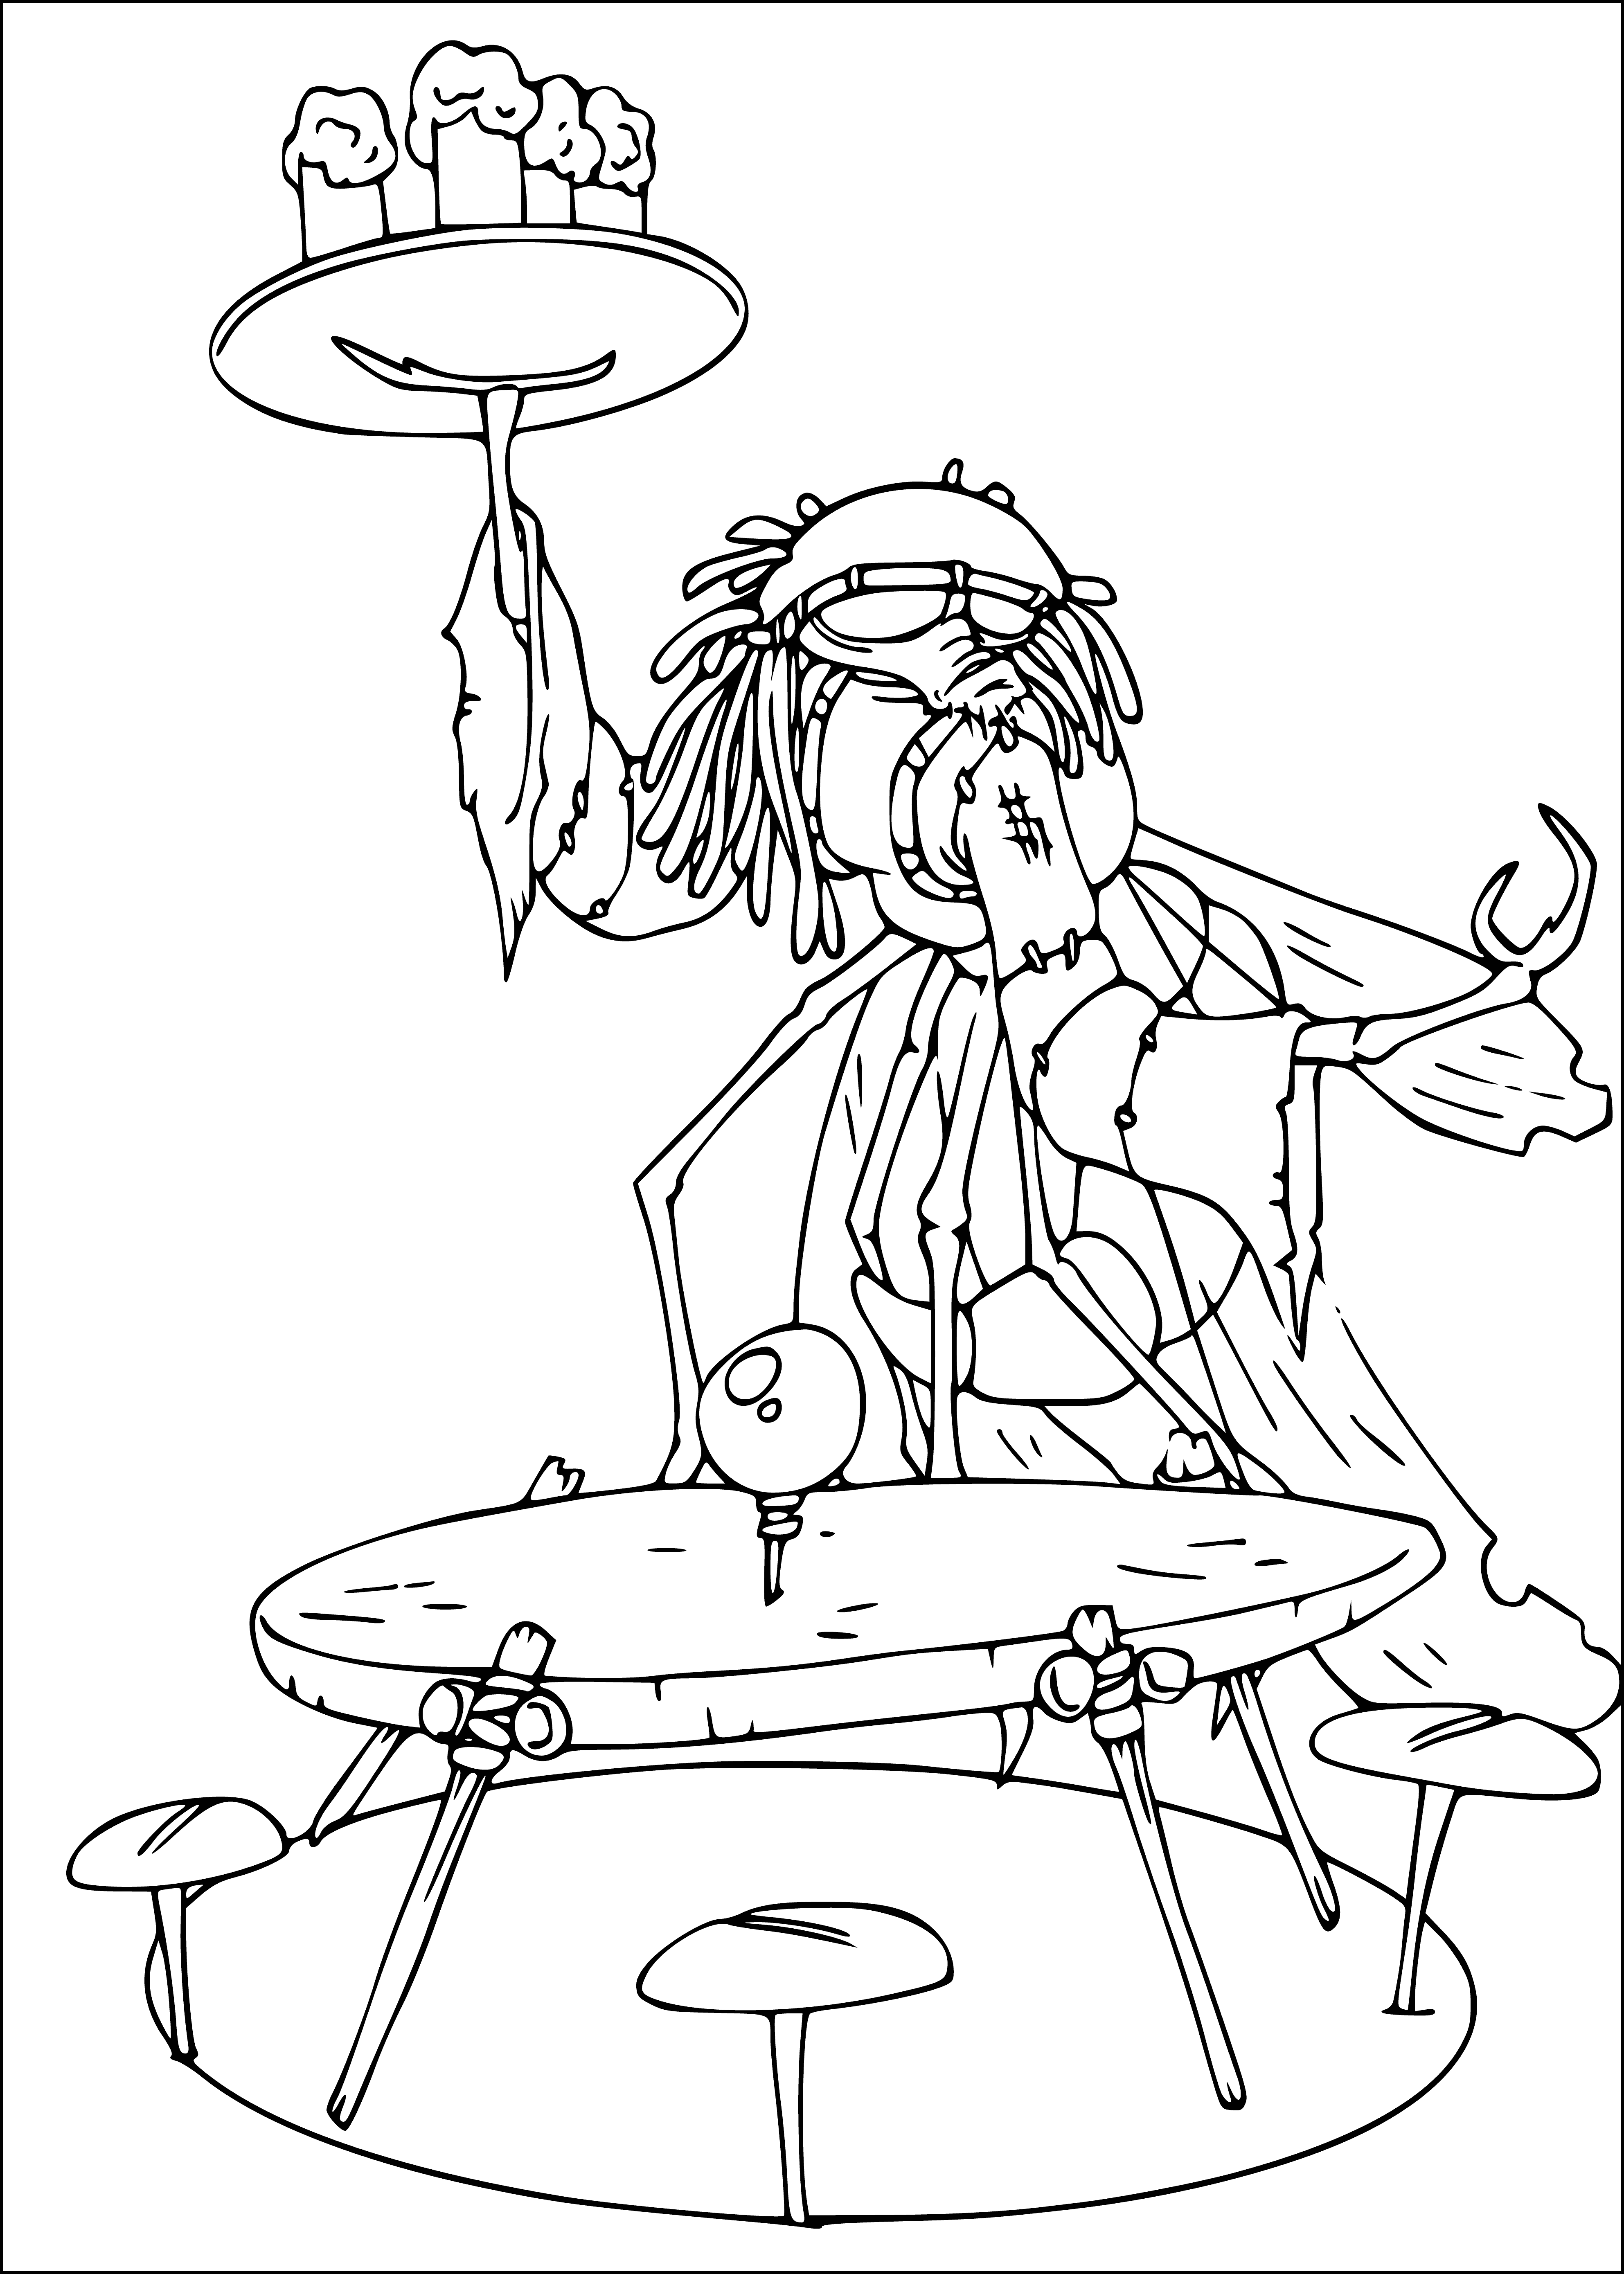 coloring page: Small blue creature with big eyes, red hat & coat holds tray with a drink.